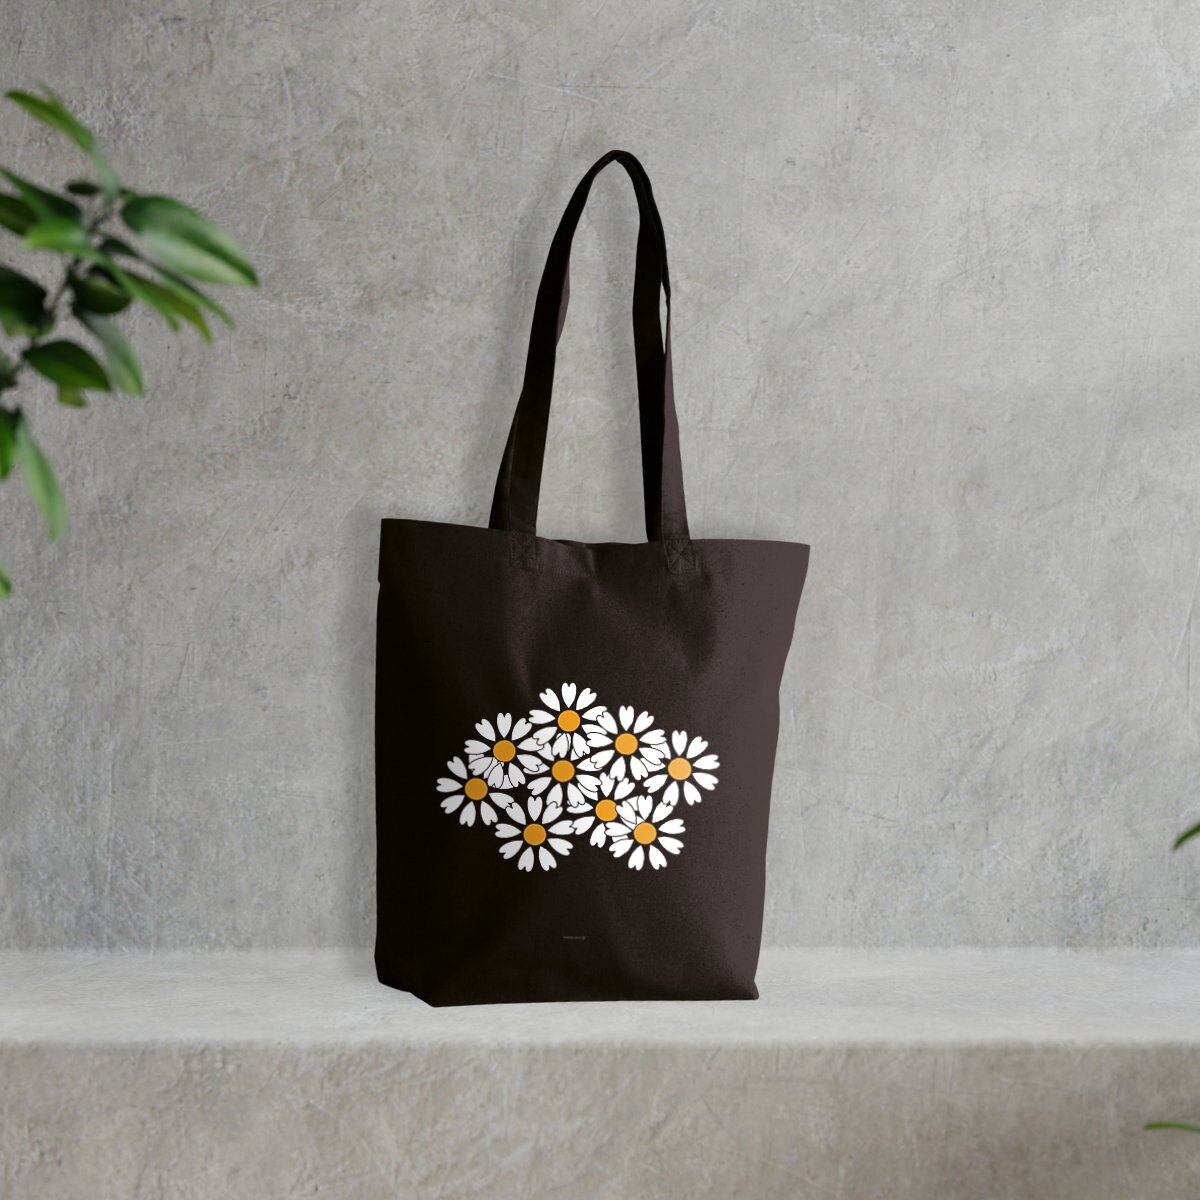 The White Heart Flowers on a Heavy Bag